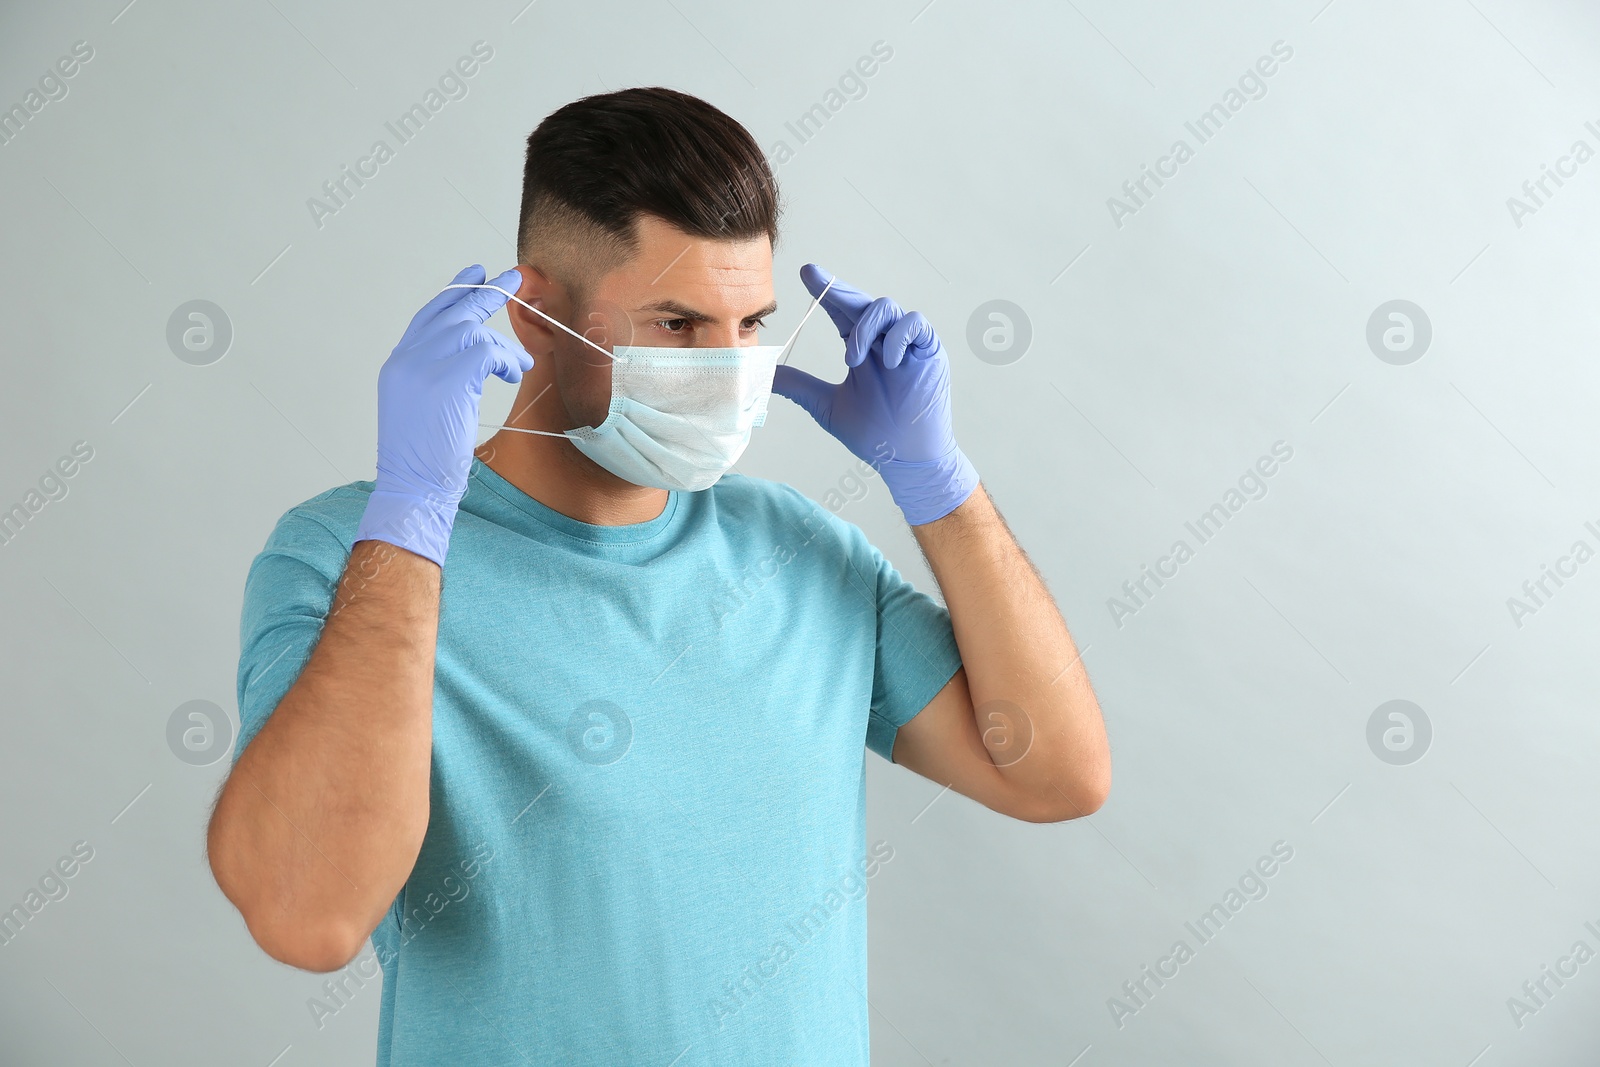 Photo of Man in medical gloves putting on protective face mask against grey background